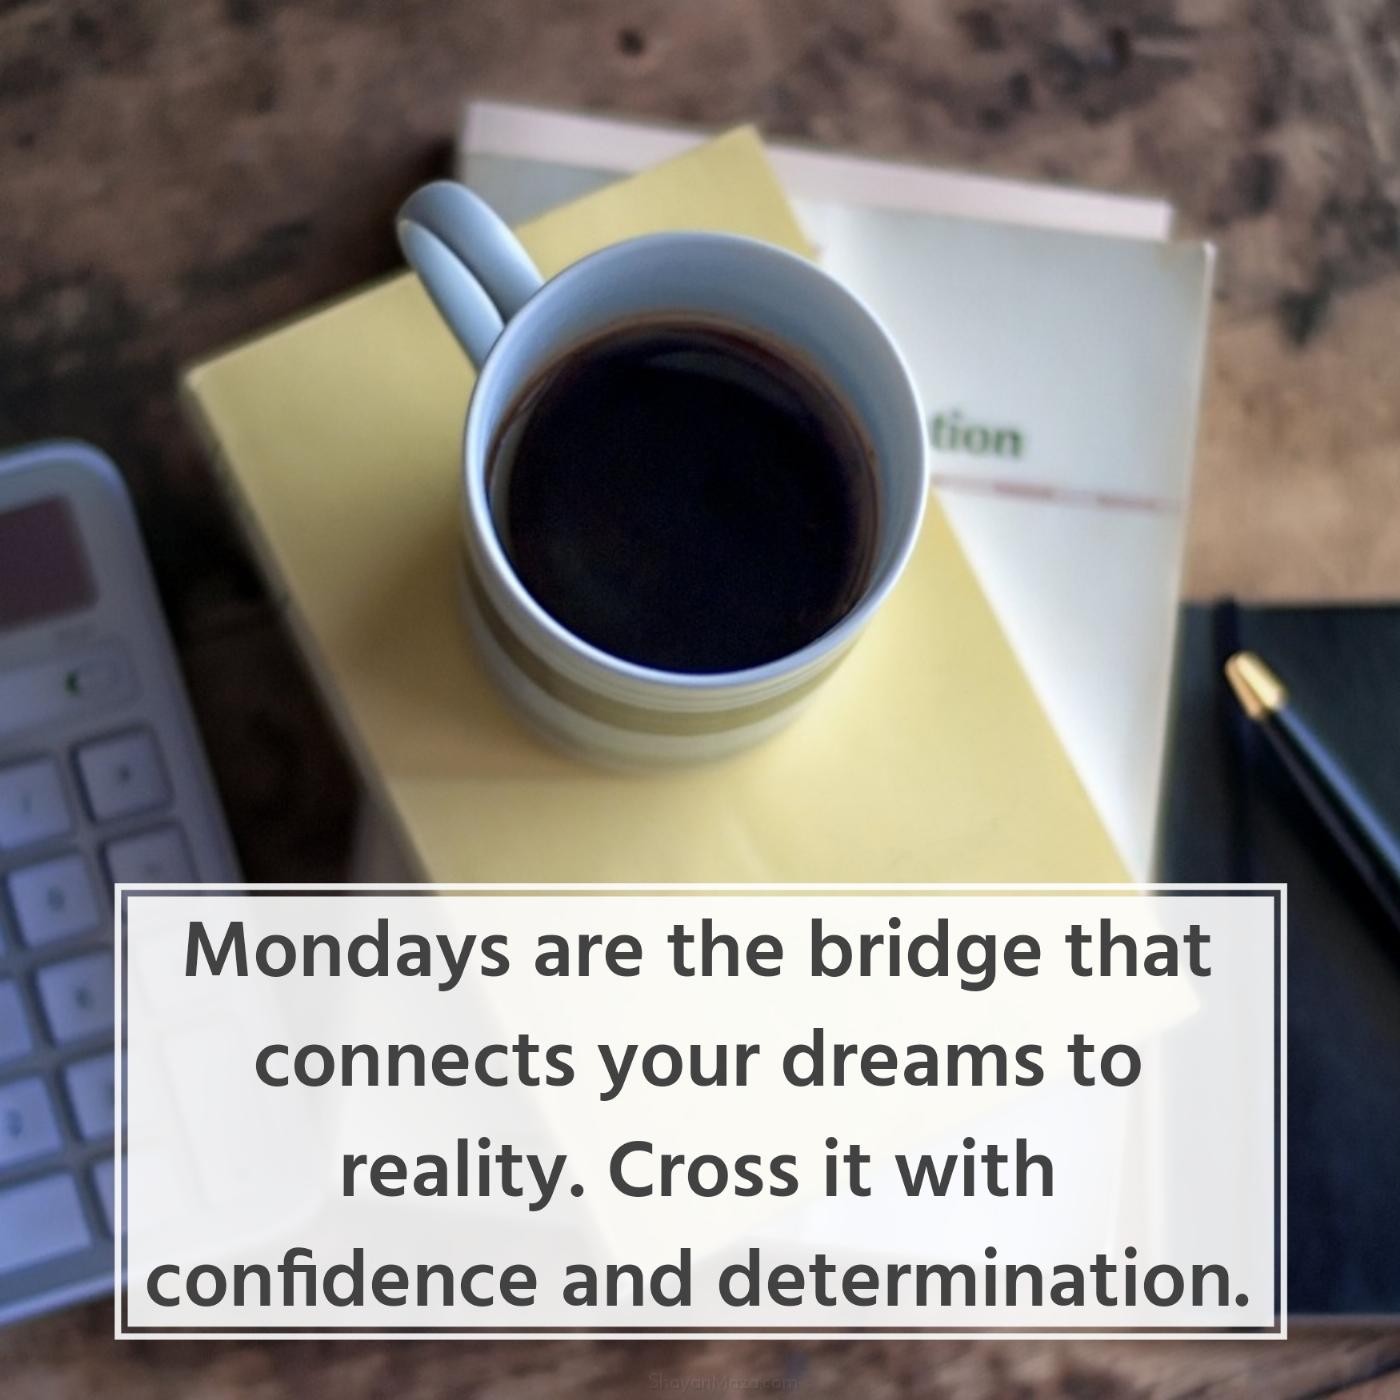 Mondays are the bridge that connects your dreams to reality